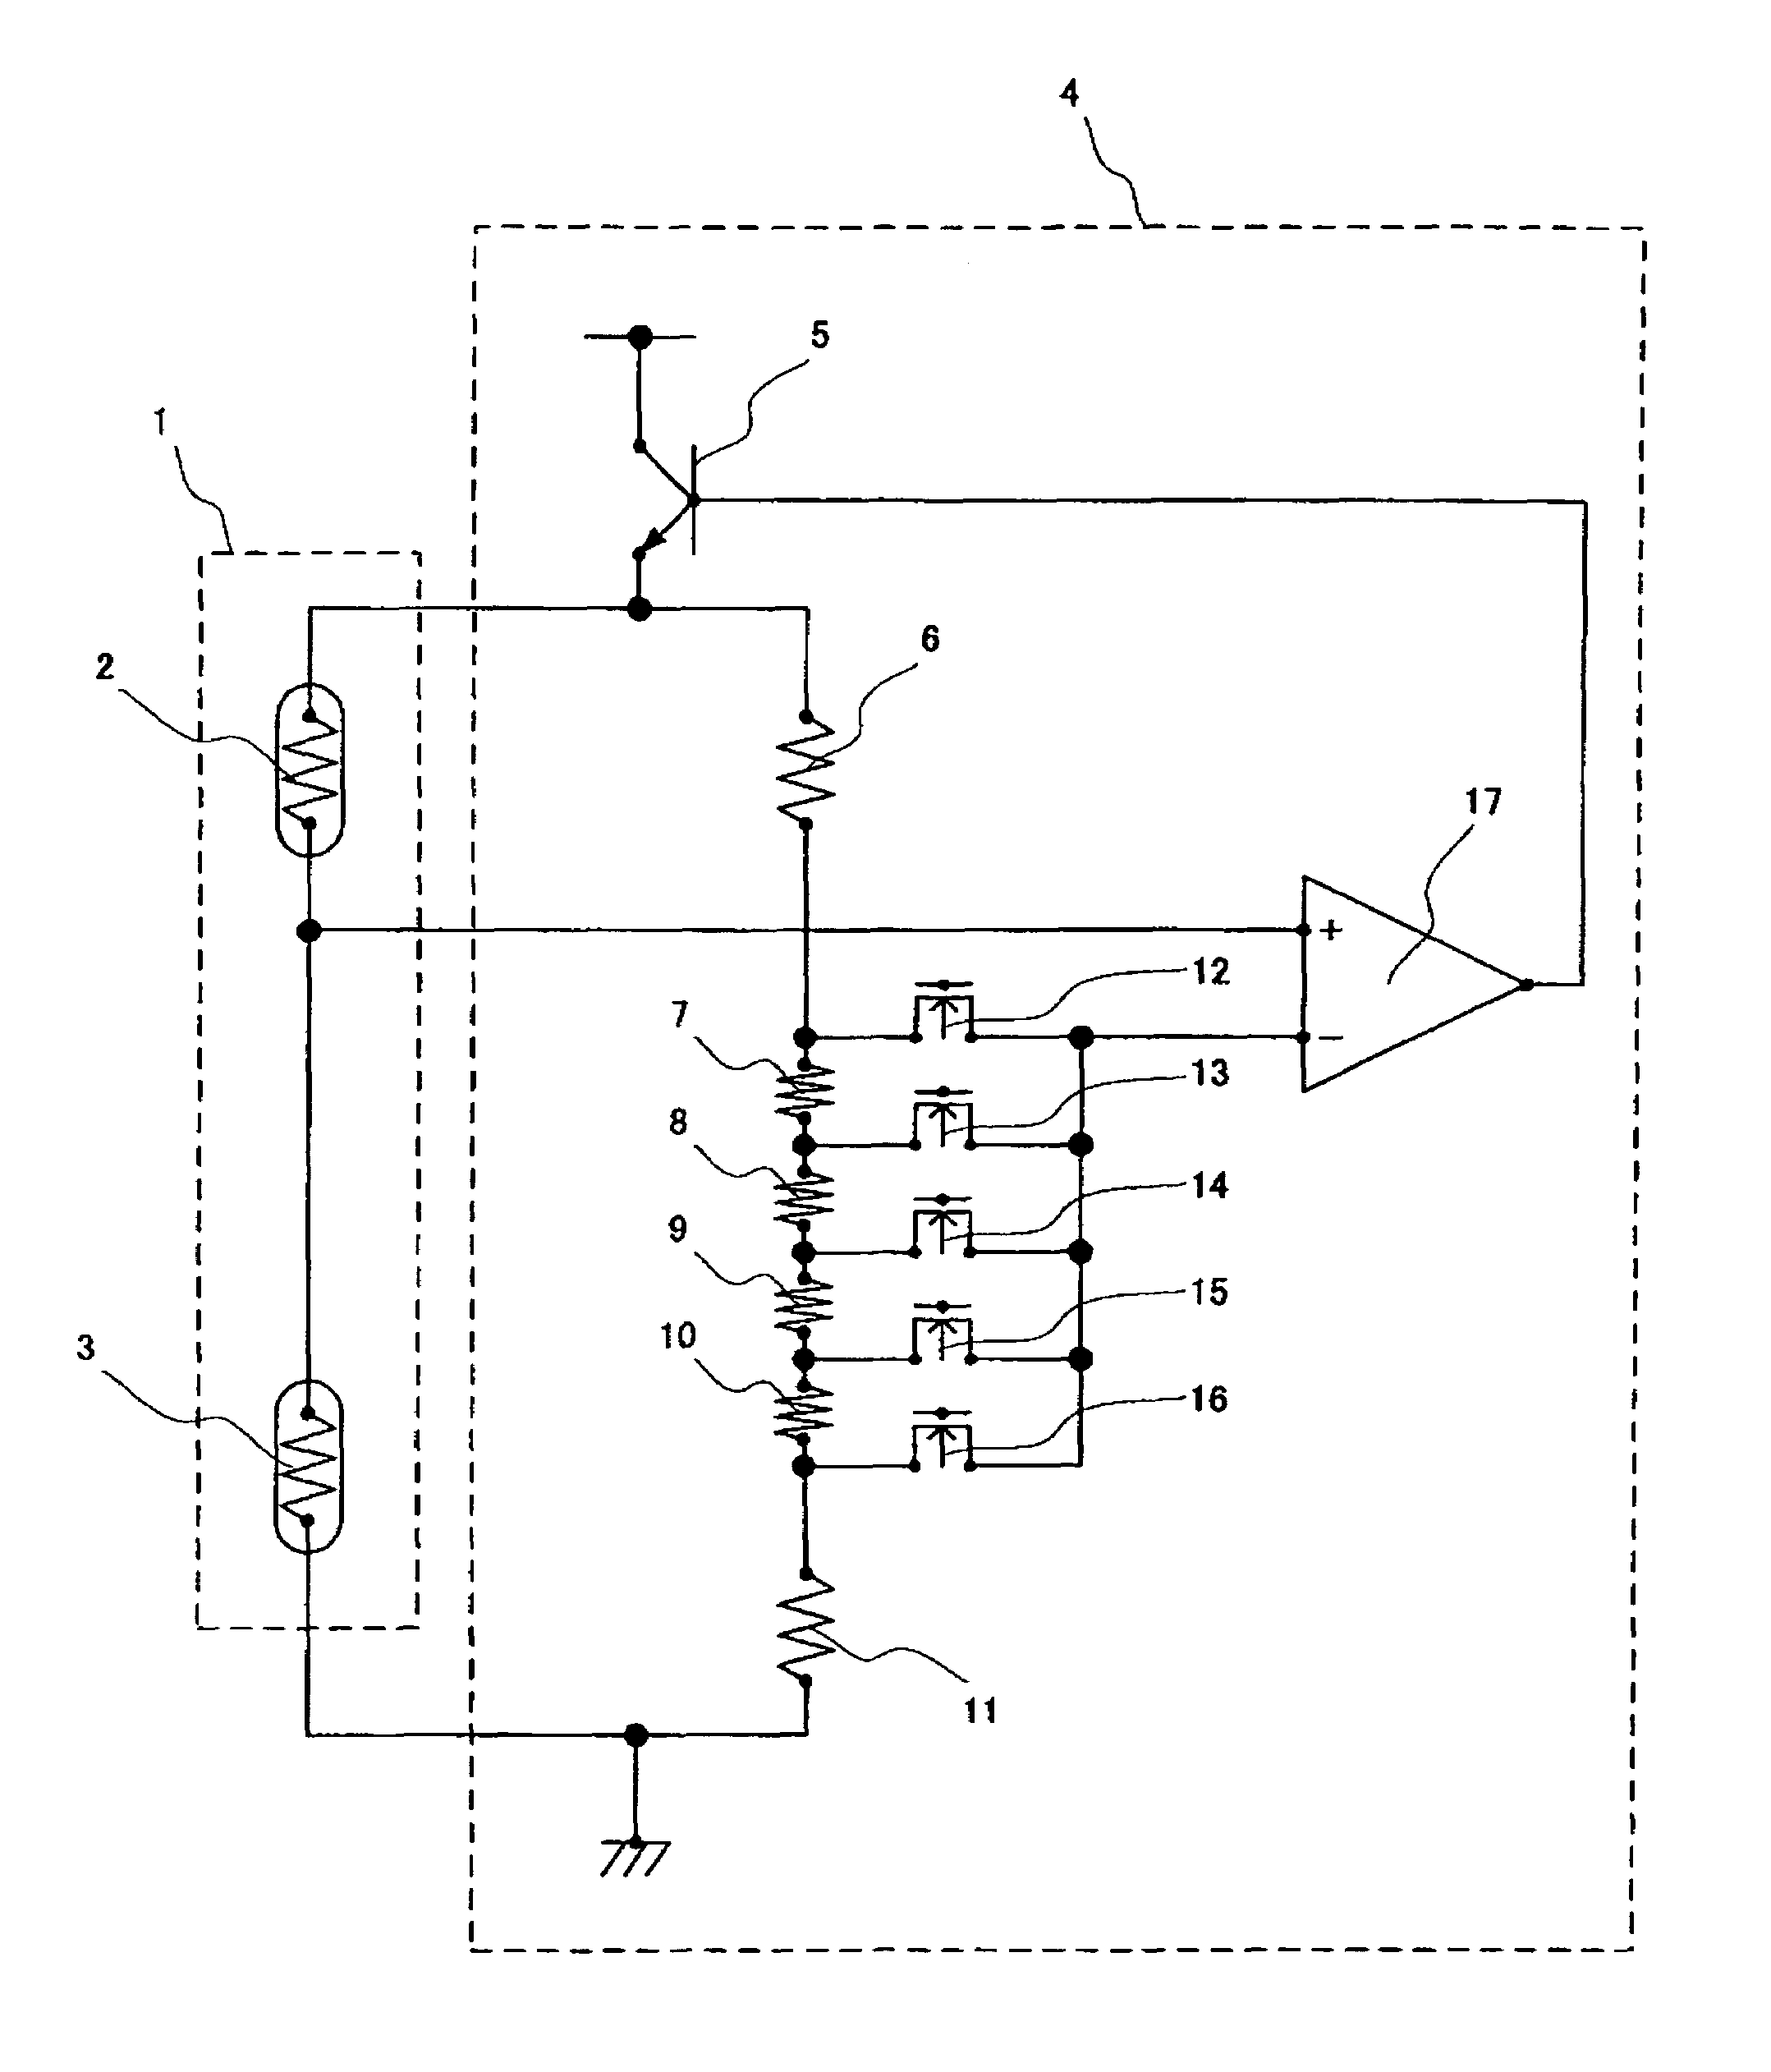 Heating resistor type flow-measuring device having a heating resistor and a thermoresistance, whose resistance value varies in response to the ambient temperature